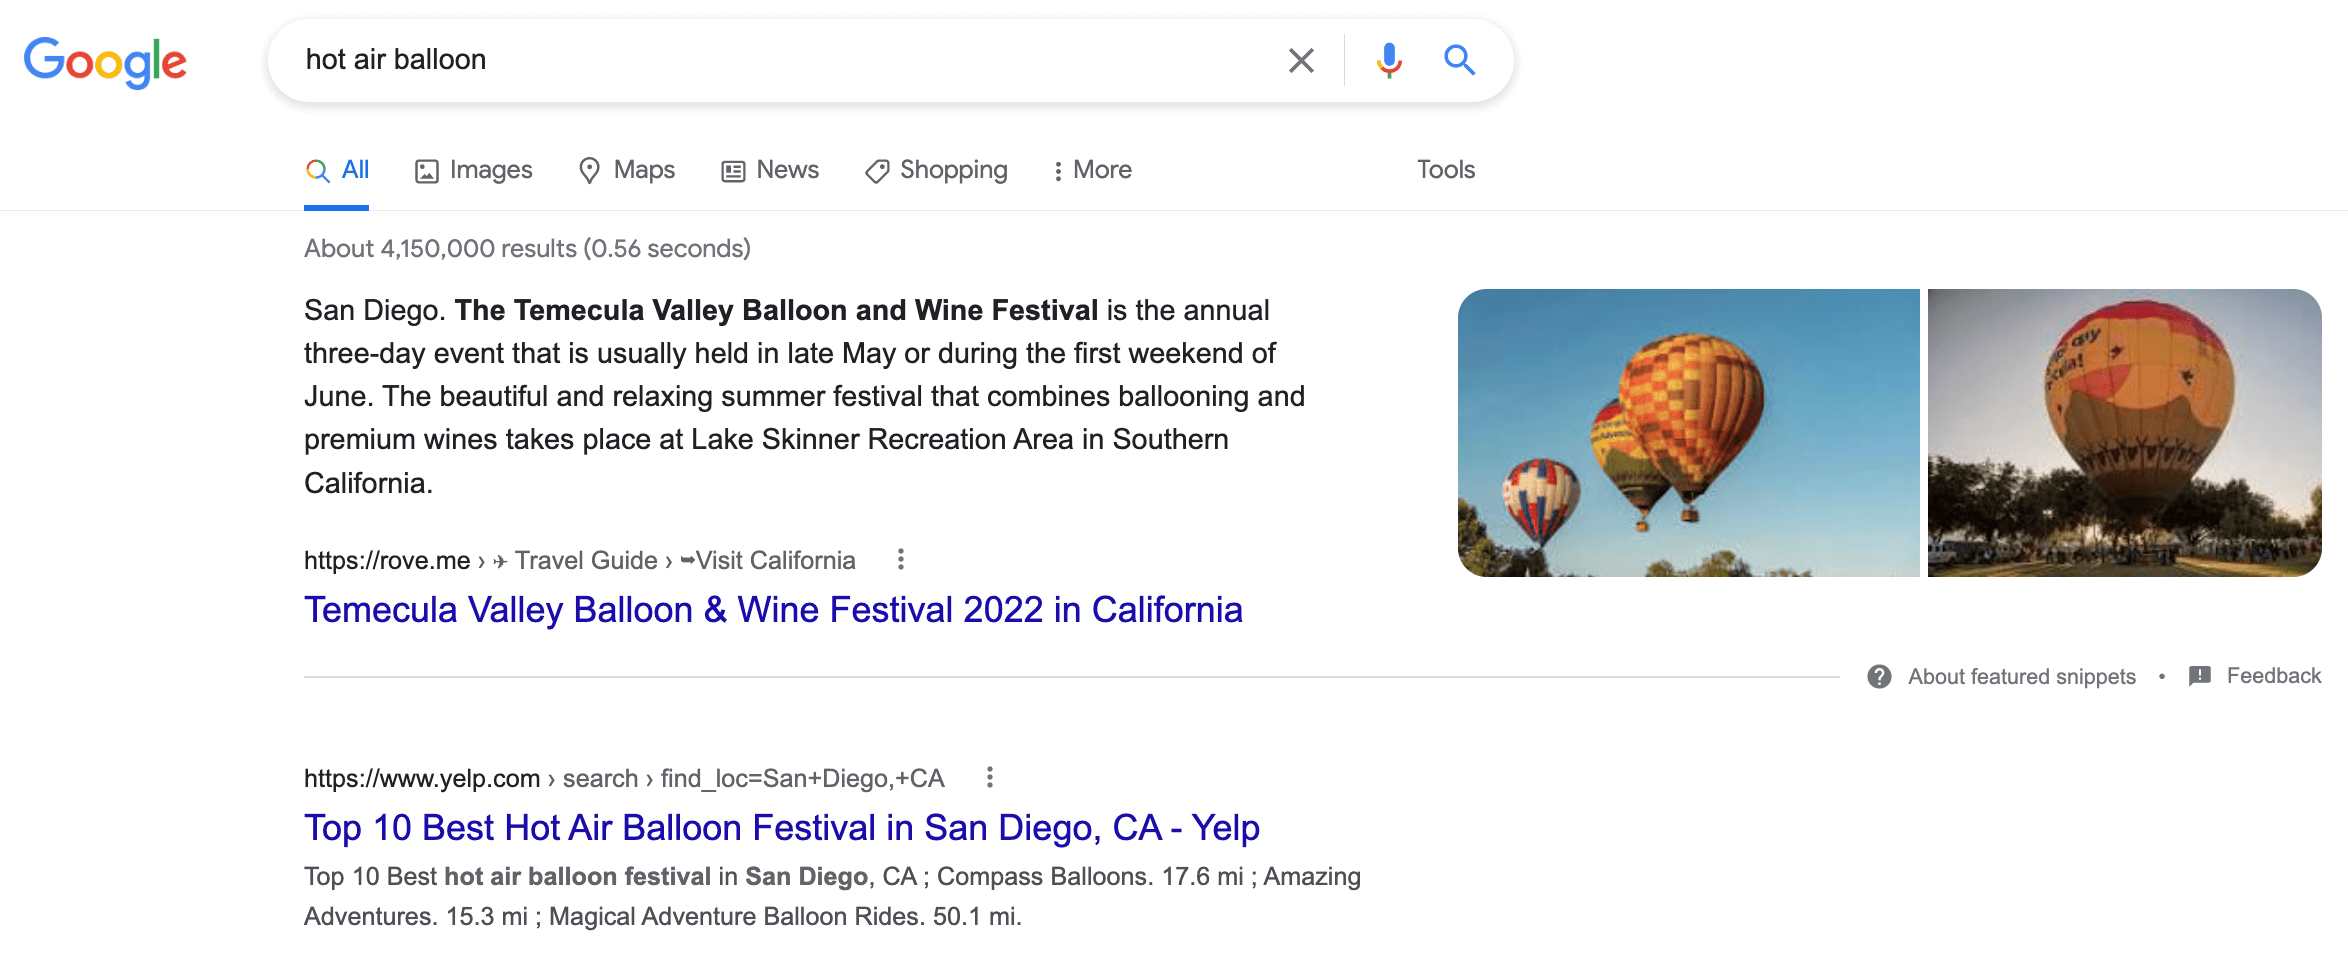 Google search results page for "hot air balloon" with snippet.